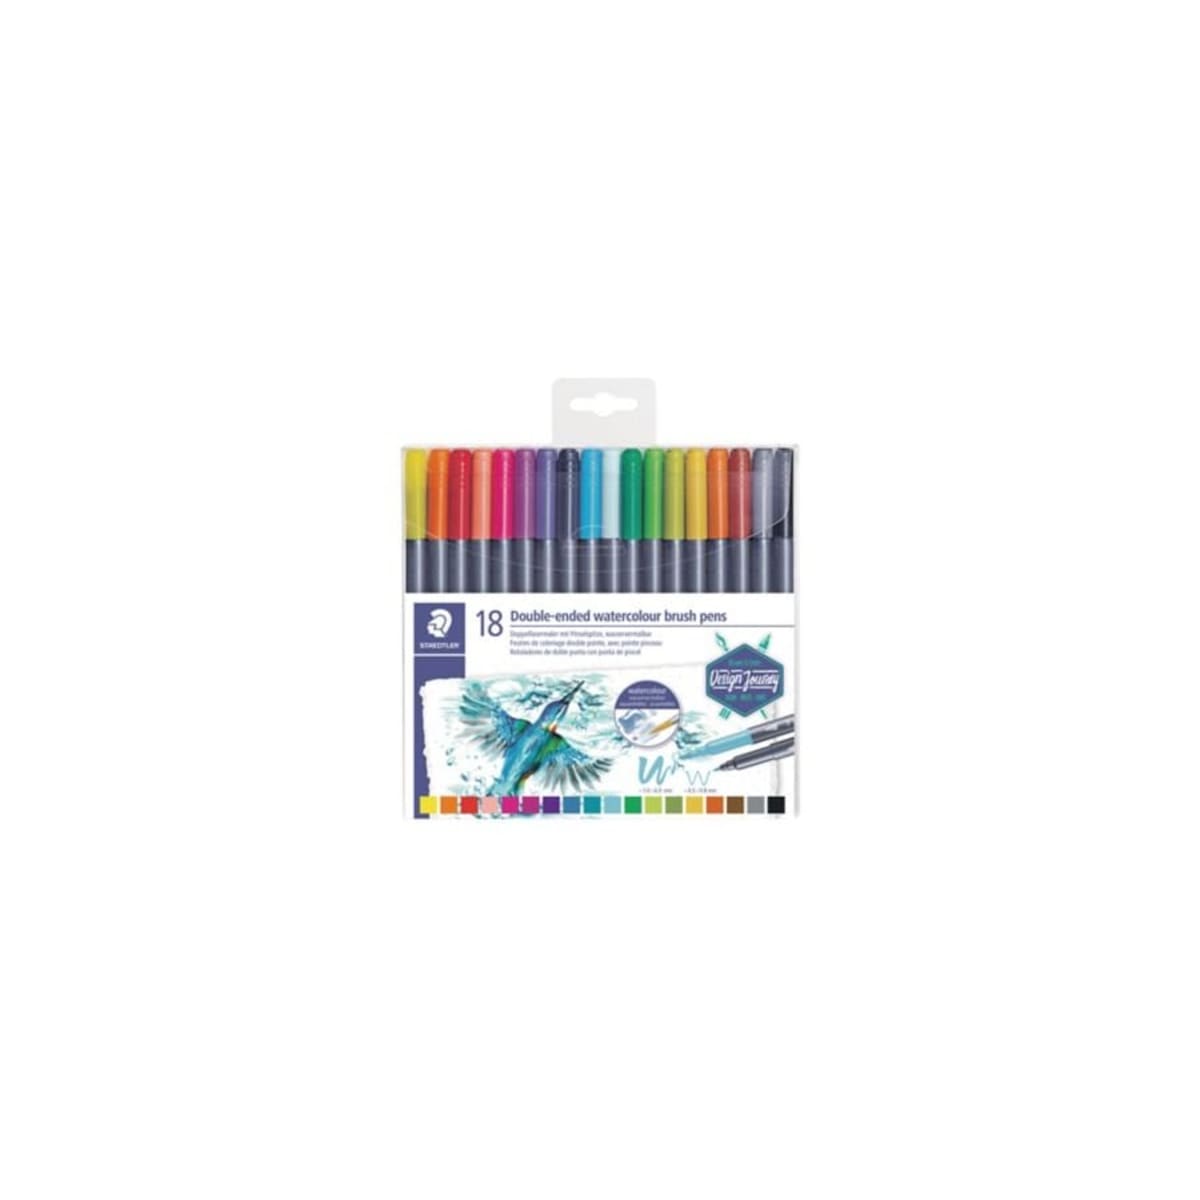 Staedtler Marsgraphic Duo Double-Ended Watercolor Brush Markers